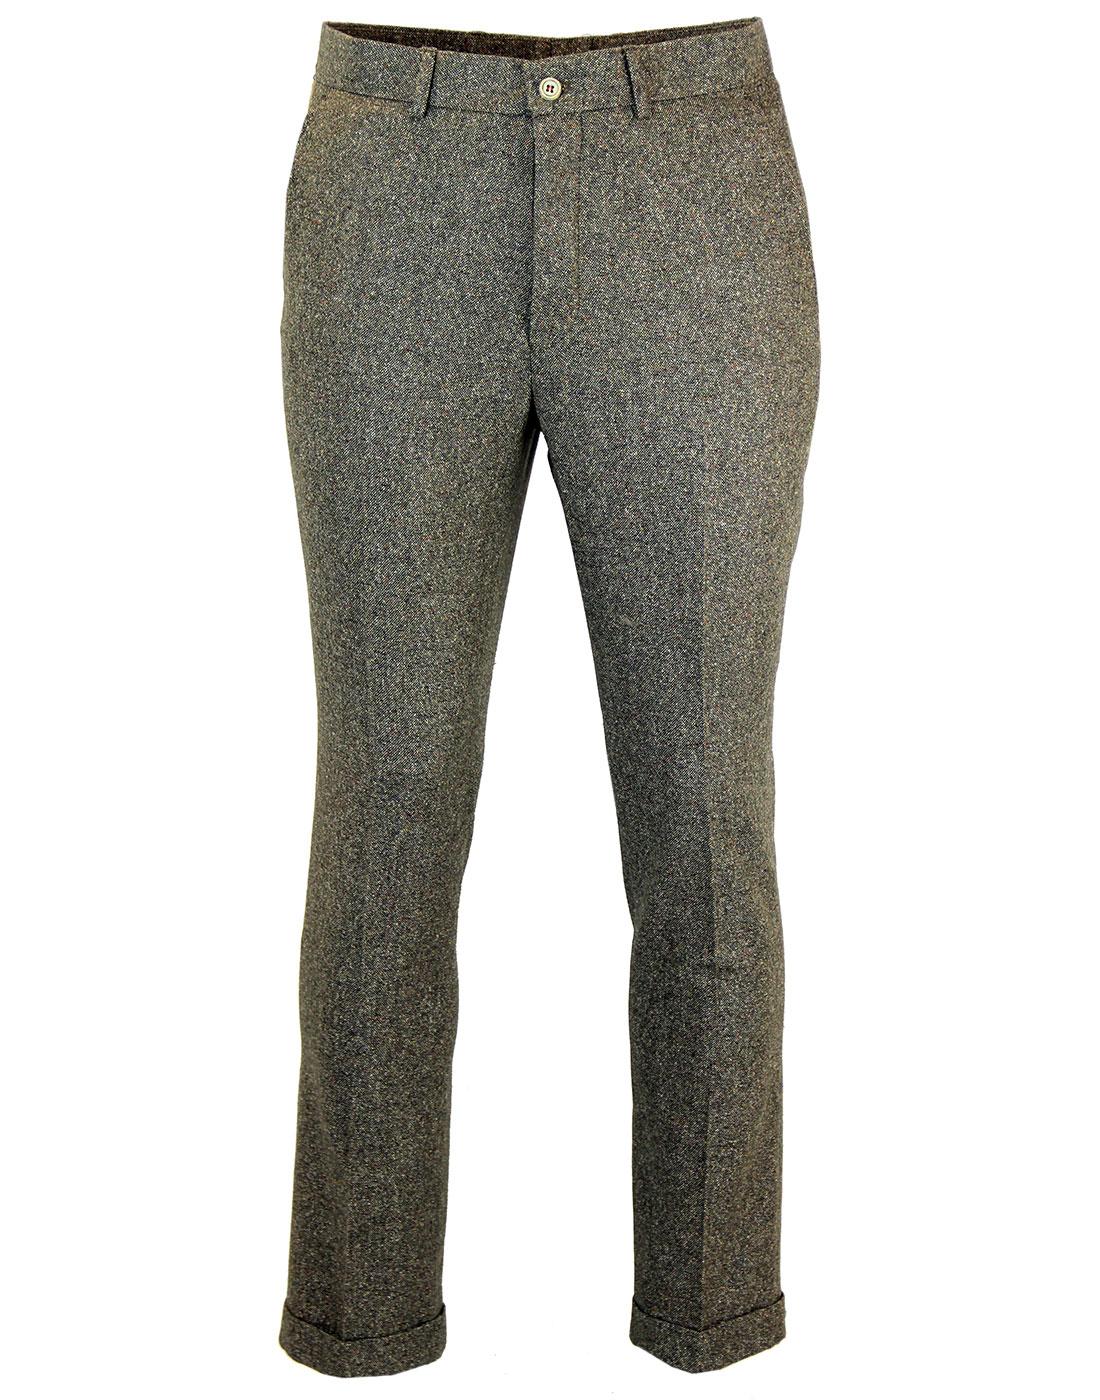 GIBSON LONDON Mod Donegal Flat Front Trousers (O)